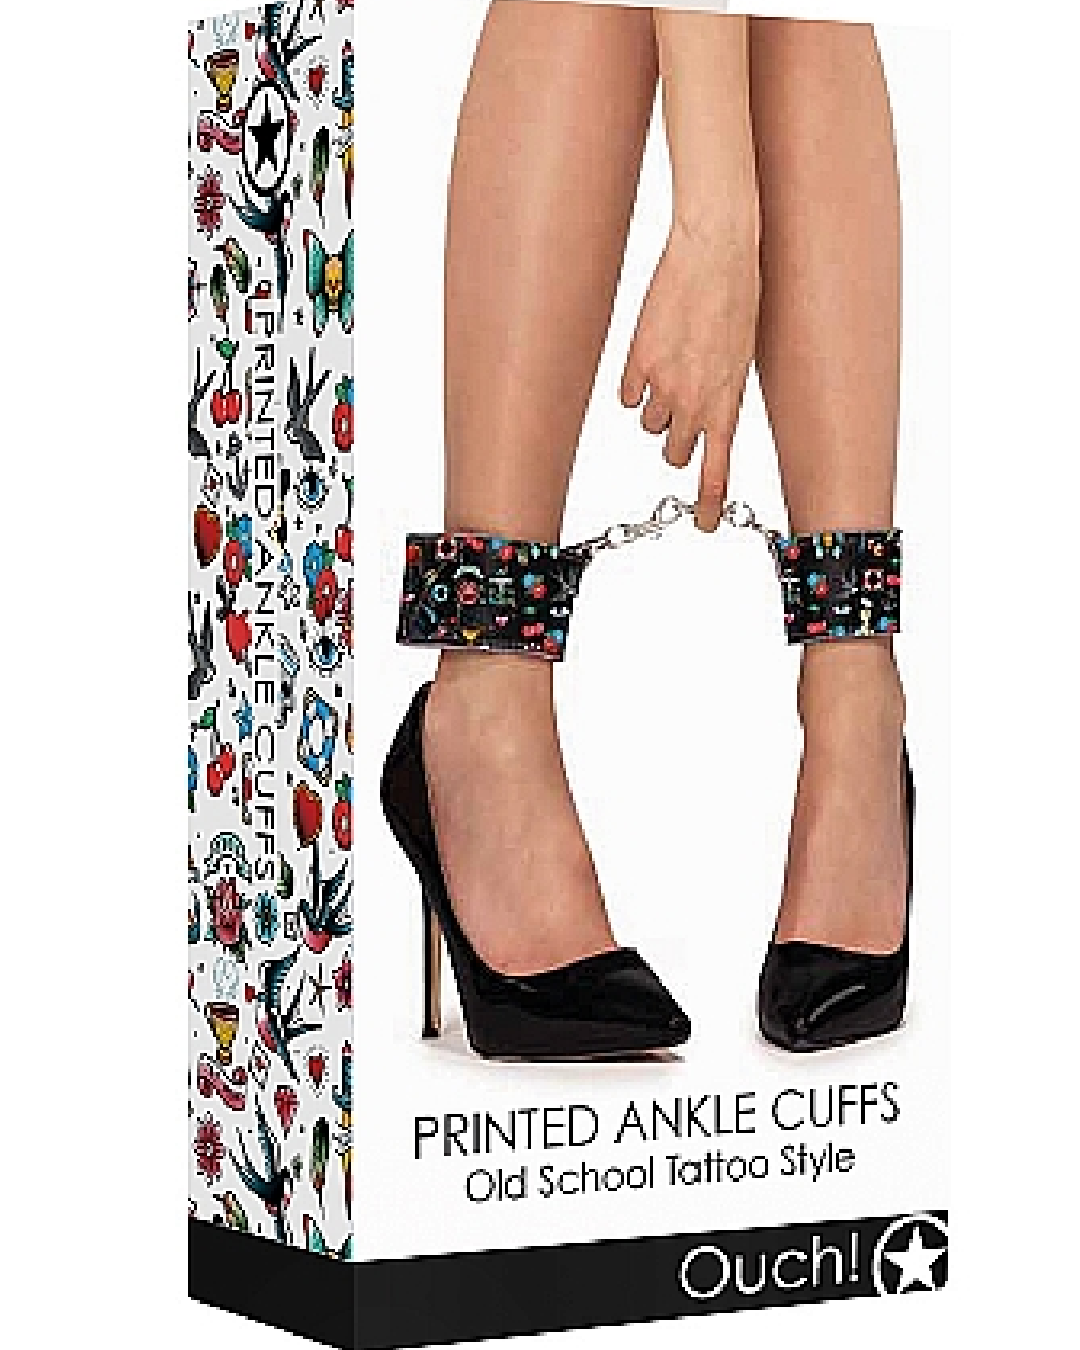 Ouch Old School Tattoo Style Printed Ankle Cuffs  product box 